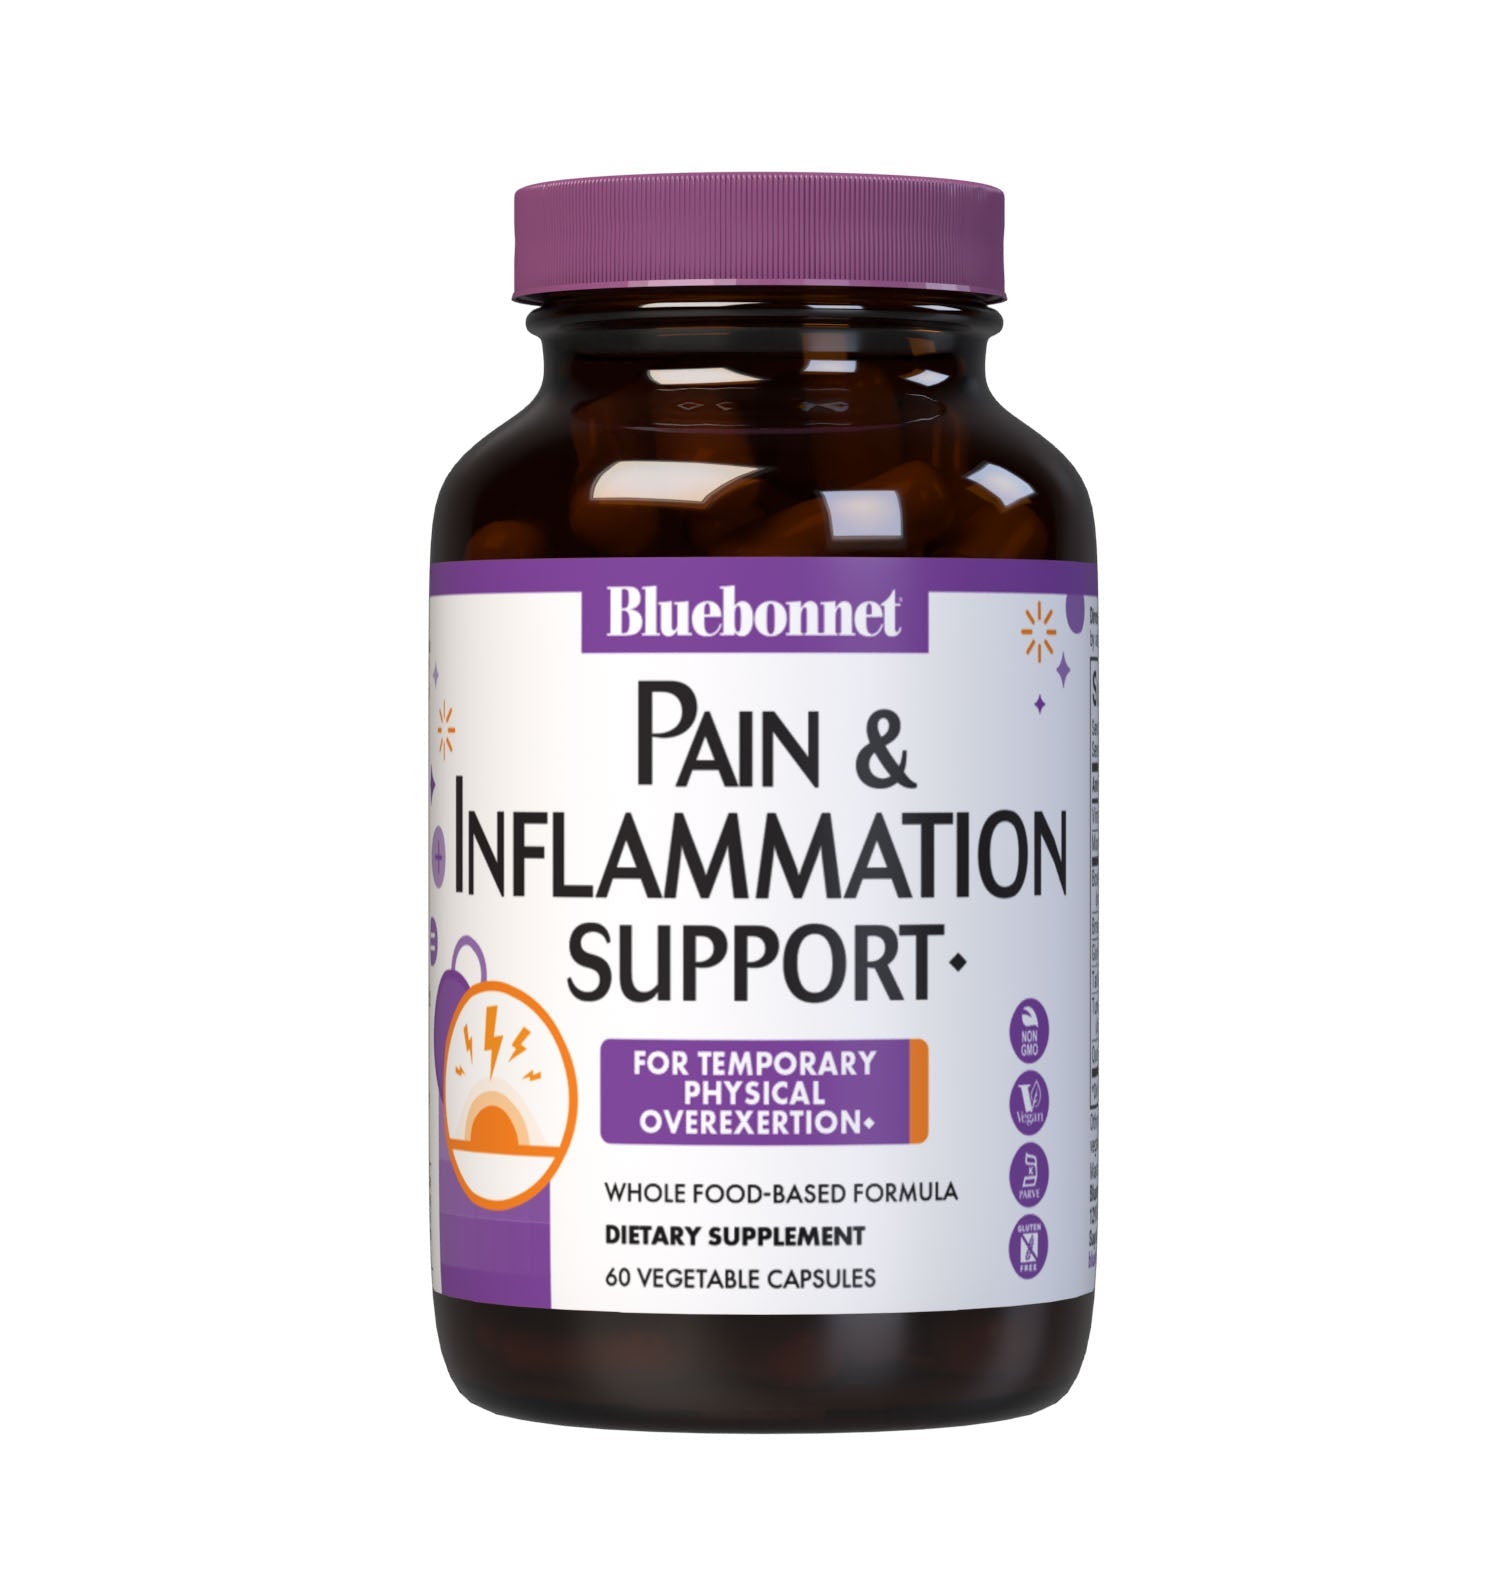 Bluebonnet’s Targeted Choice Pain and Inflammation Support 60 Vegetable Capsules are specially formulated with a unique blend of sustainably harvested or wildcrafted herbal extracts, such as CurcuWin (46 x more bioavailable turmeric root extract) and ApresFlex (52% more bioavailable, patent-pending boswellia gum resin extract). #size_60 count